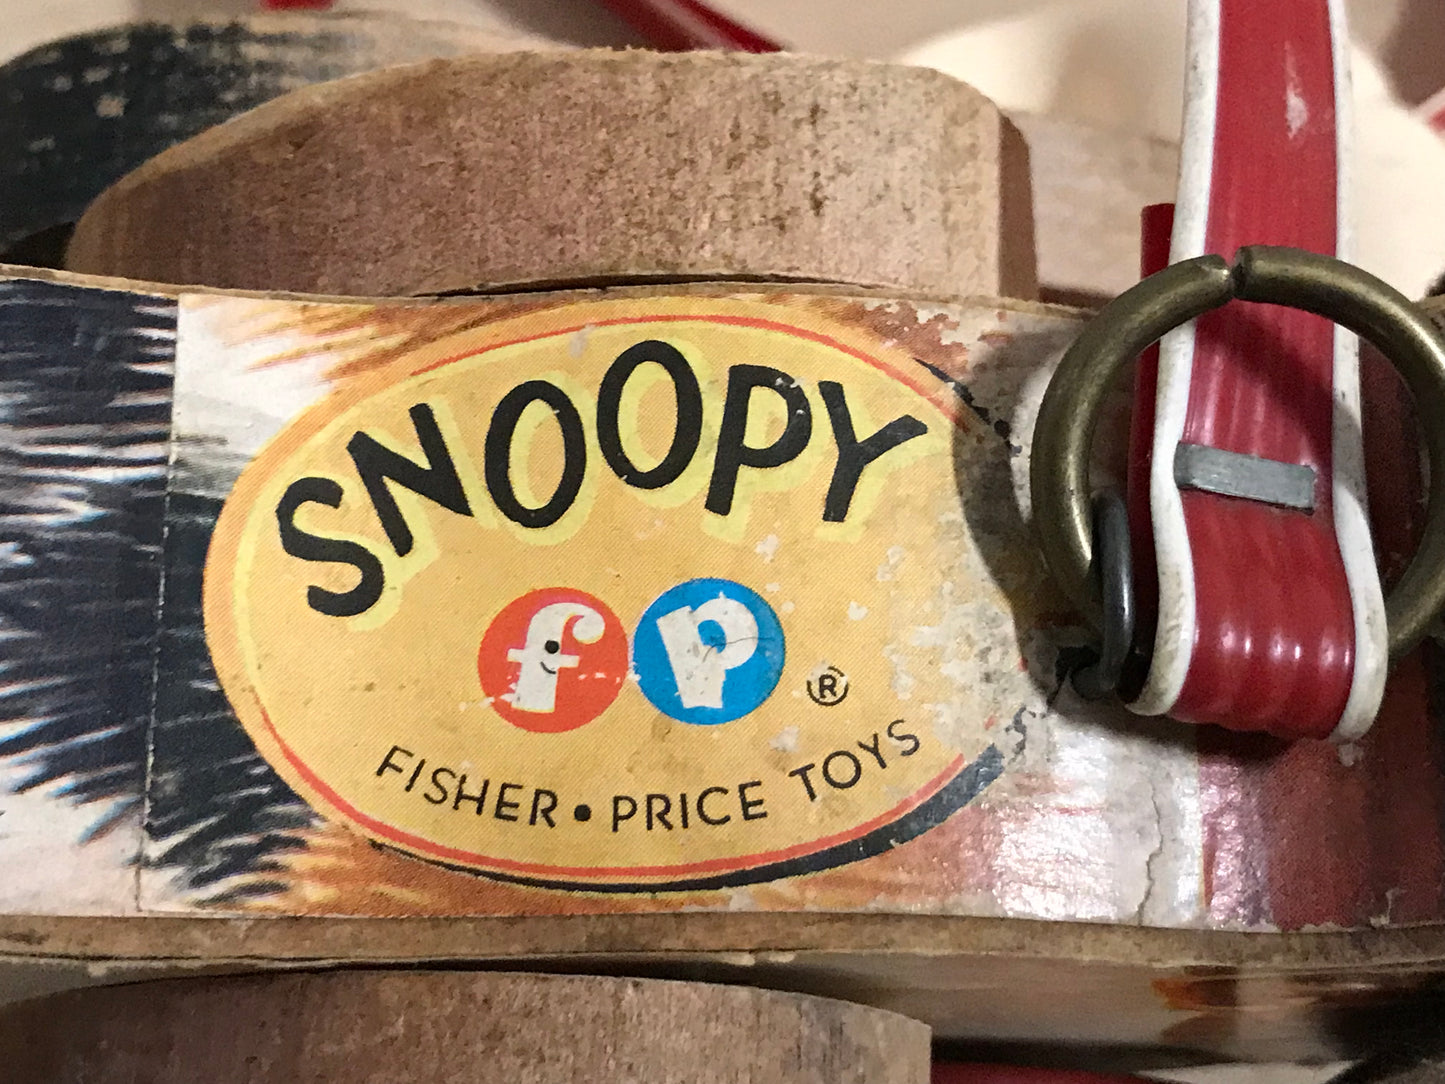 Fisher Price Vintage 1961 Wood Large Snoopy Pull Along Dog With Original Leash RARE